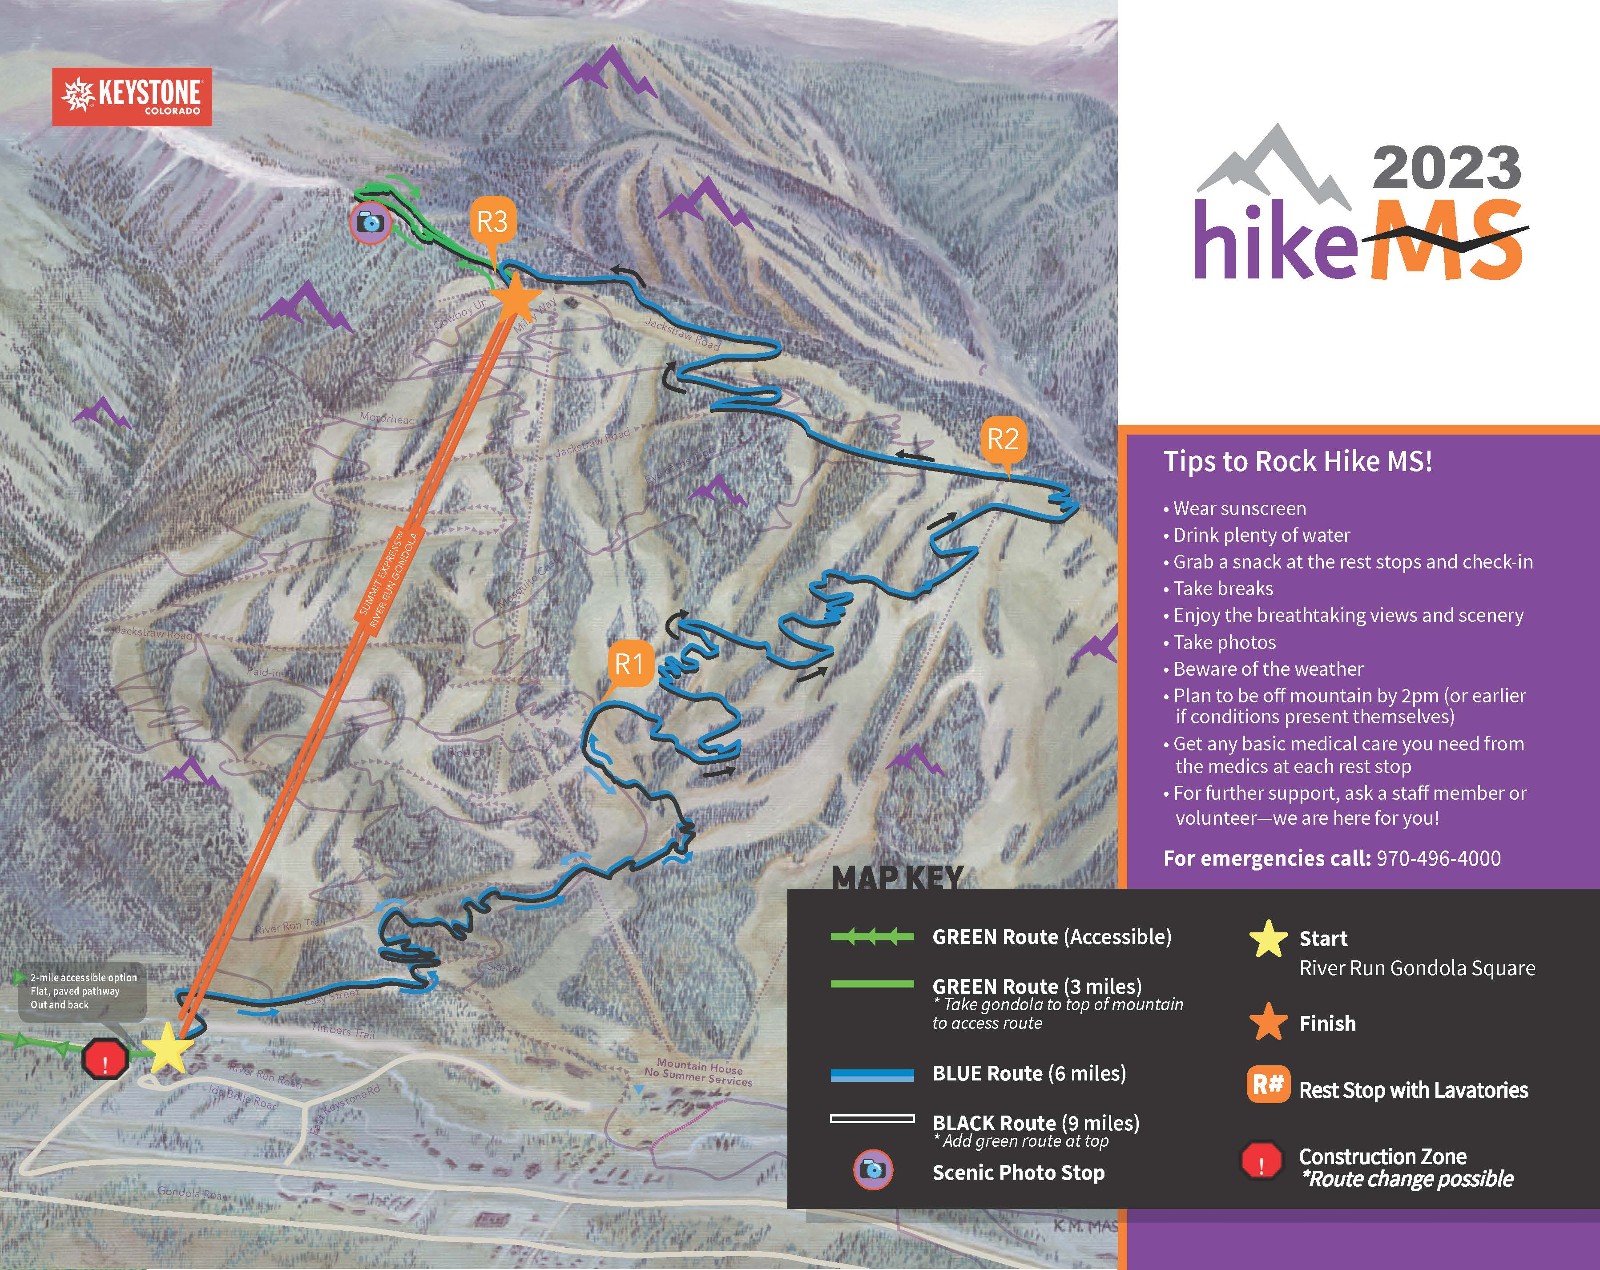 Hike MS 2023 route map